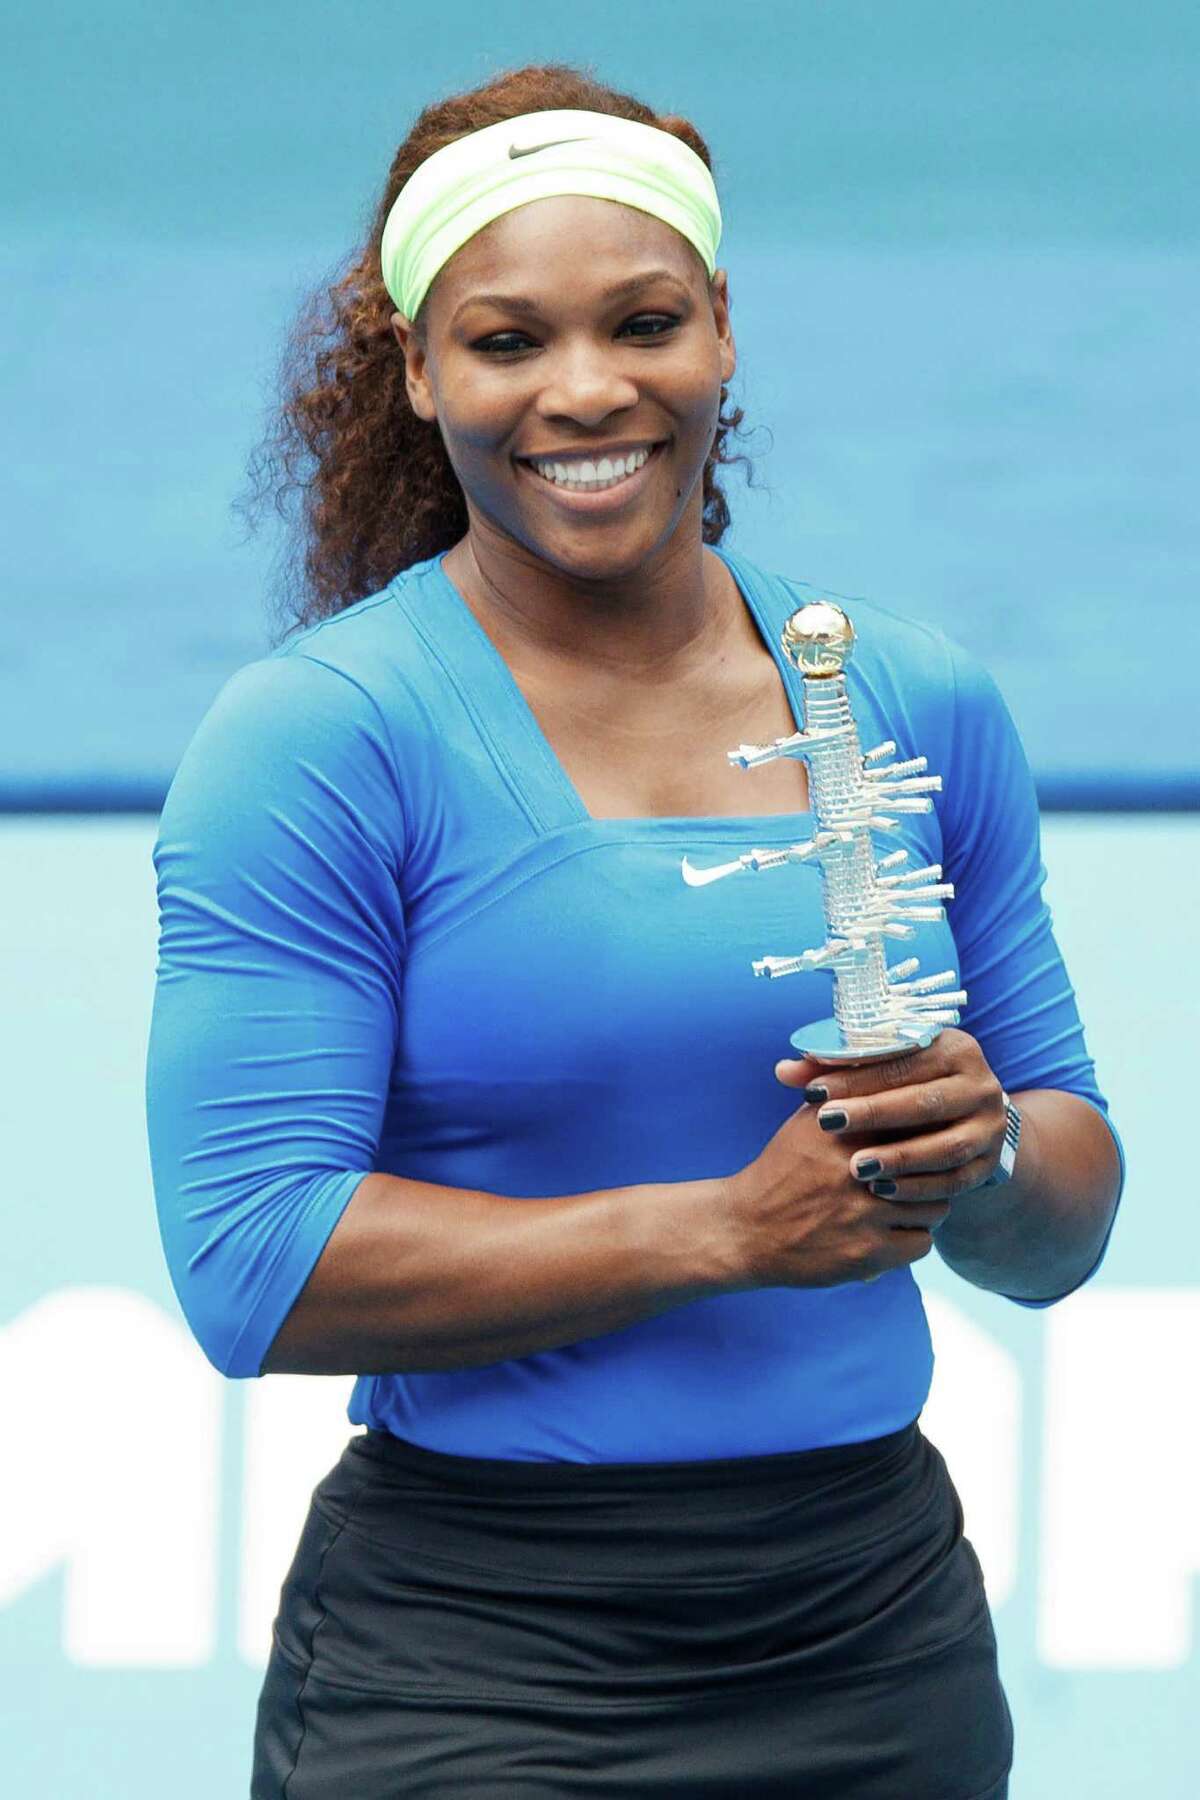 Serena Williams from U.S. holds the trophy after defeating Victoria Azarenka from Belarus in their singles women's final tennis match at the Madrid Open tennis tournament in Madrid Sunday, May 13, 2012. (AP Photo/Daniel Ochoa de Olza)